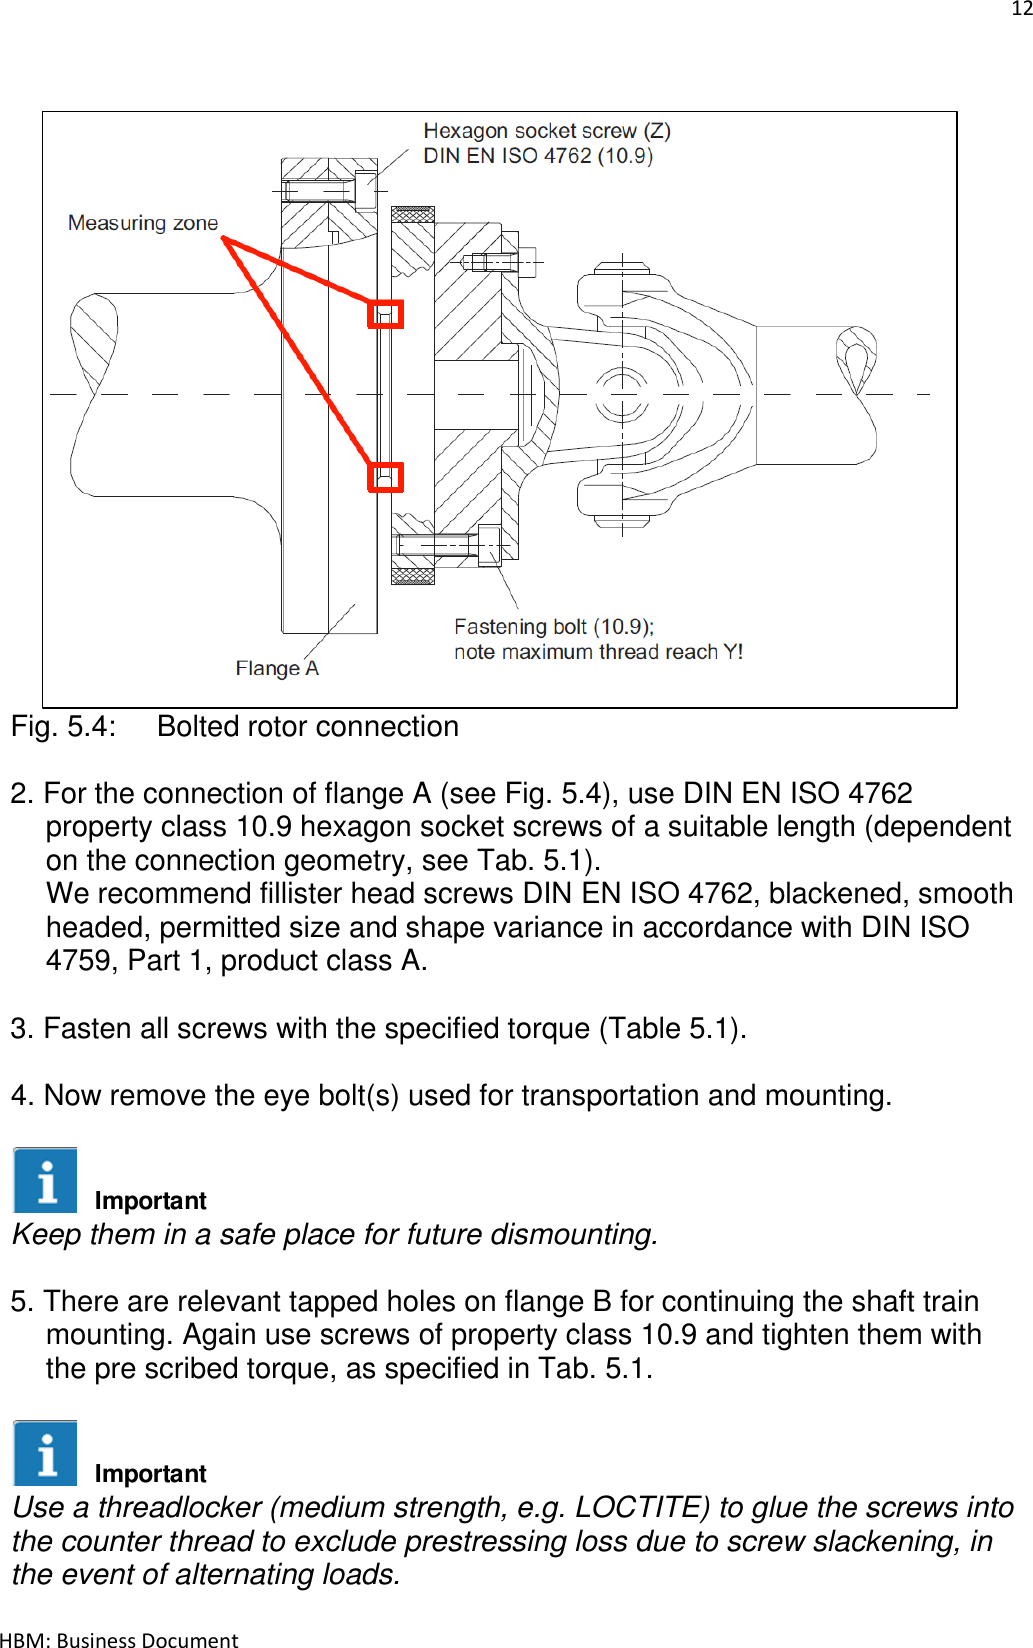 12  HBM: Business Document    Fig. 5.4:  Bolted rotor connection  2. For the connection of flange A (see Fig. 5.4), use DIN EN ISO 4762 property class 10.9 hexagon socket screws of a suitable length (dependent on the connection geometry, see Tab. 5.1). We recommend fillister head screws DIN EN ISO 4762, blackened, smooth headed, permitted size and shape variance in accordance with DIN ISO 4759, Part 1, product class A.  3. Fasten all screws with the specified torque (Table 5.1).  4. Now remove the eye bolt(s) used for transportation and mounting.   Keep them in a safe place for future dismounting.  5. There are relevant tapped holes on flange B for continuing the shaft train mounting. Again use screws of property class 10.9 and tighten them with the pre scribed torque, as specified in Tab. 5.1.   Use a threadlocker (medium strength, e.g. LOCTITE) to glue the screws into the counter thread to exclude prestressing loss due to screw slackening, in the event of alternating loads.  ImportantImportant